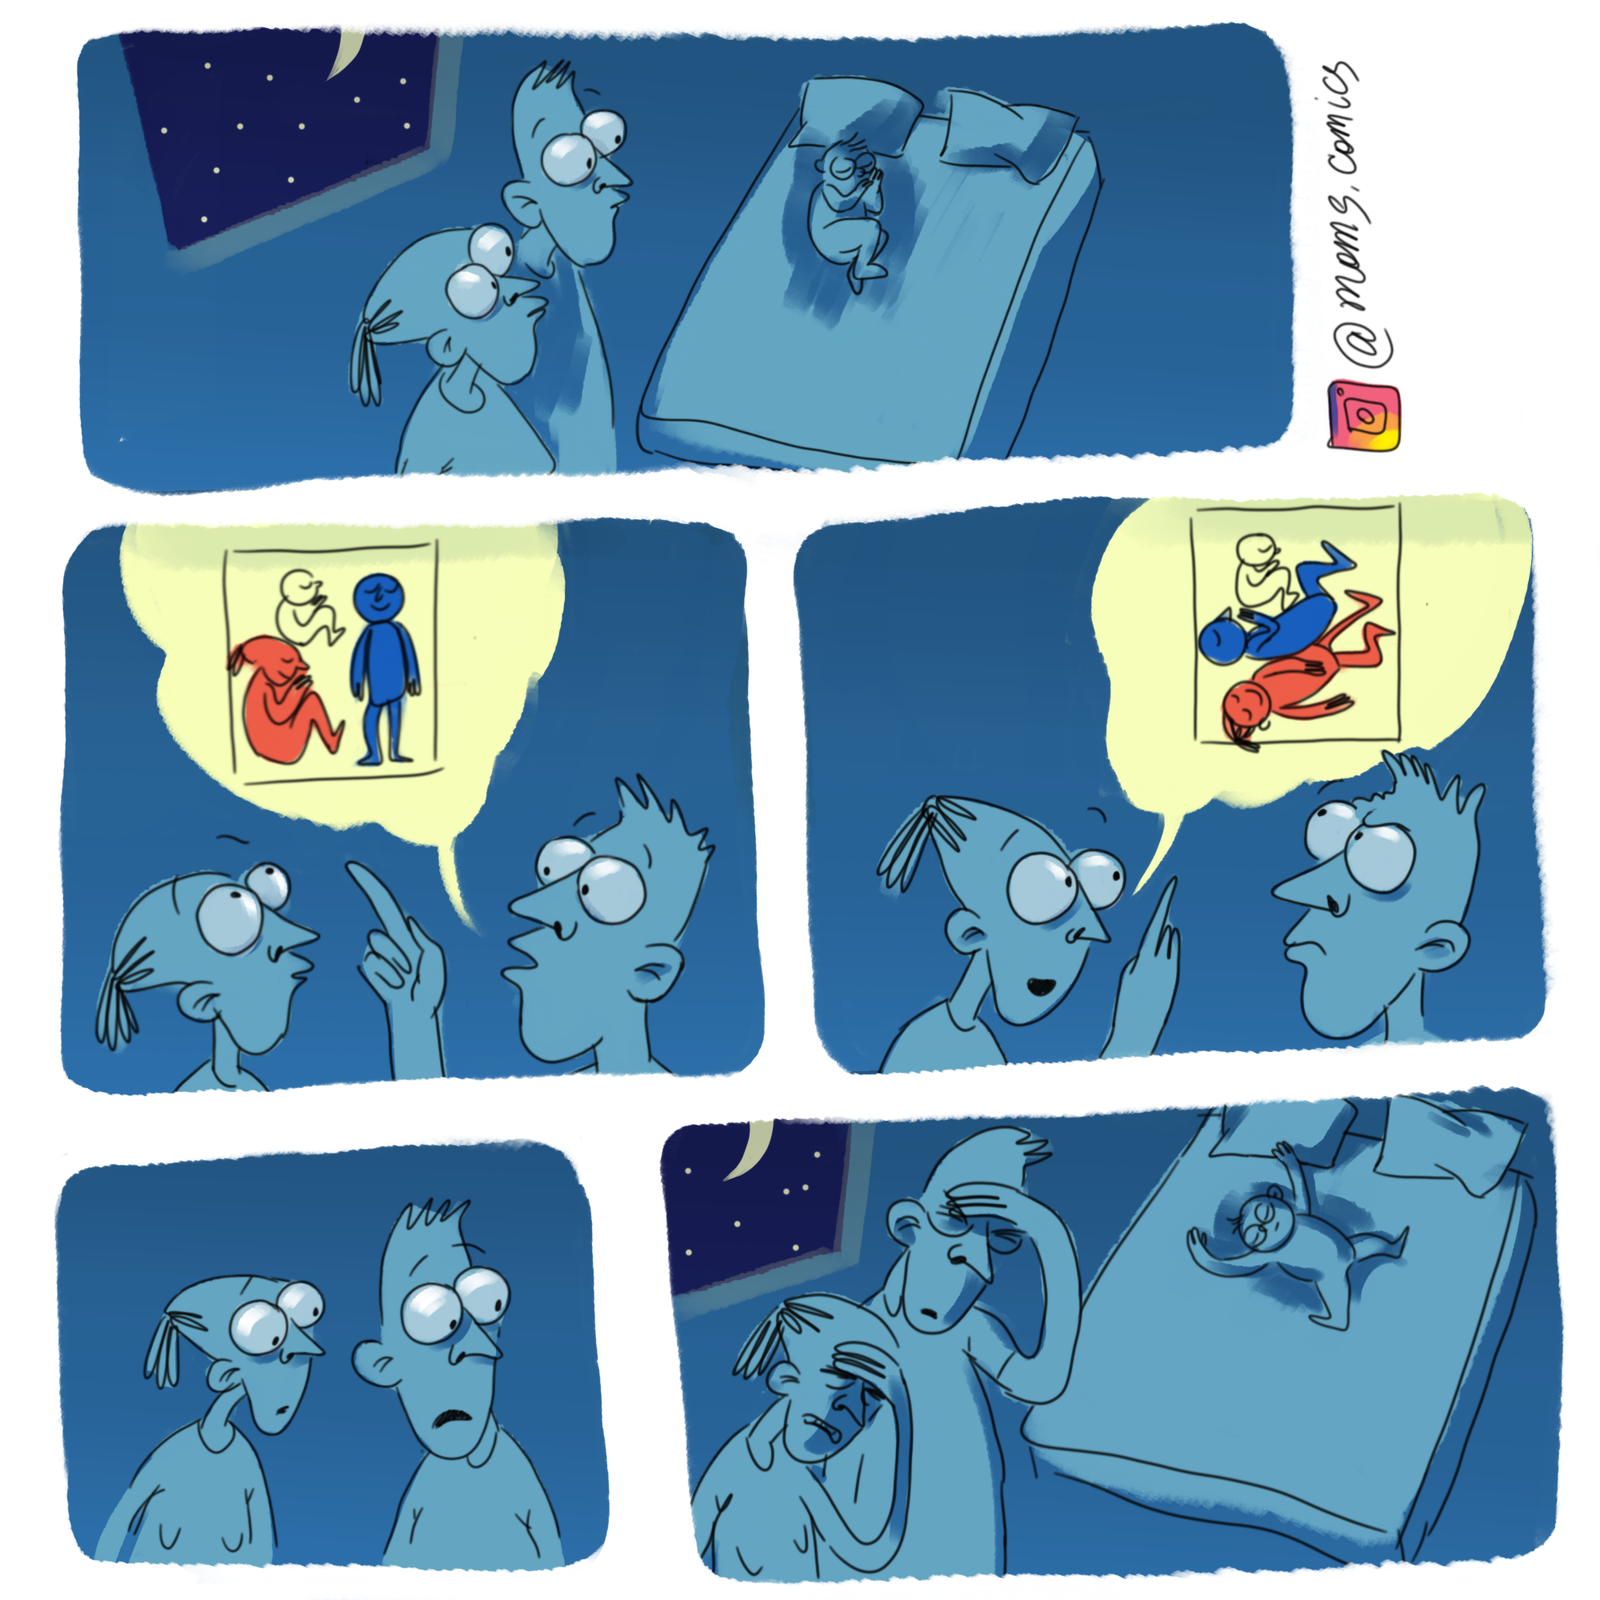 Comics about the happiness of being parents - My, Children, Parents, Family, Motherhood, Playground, Upbringing, Comics, Longpost